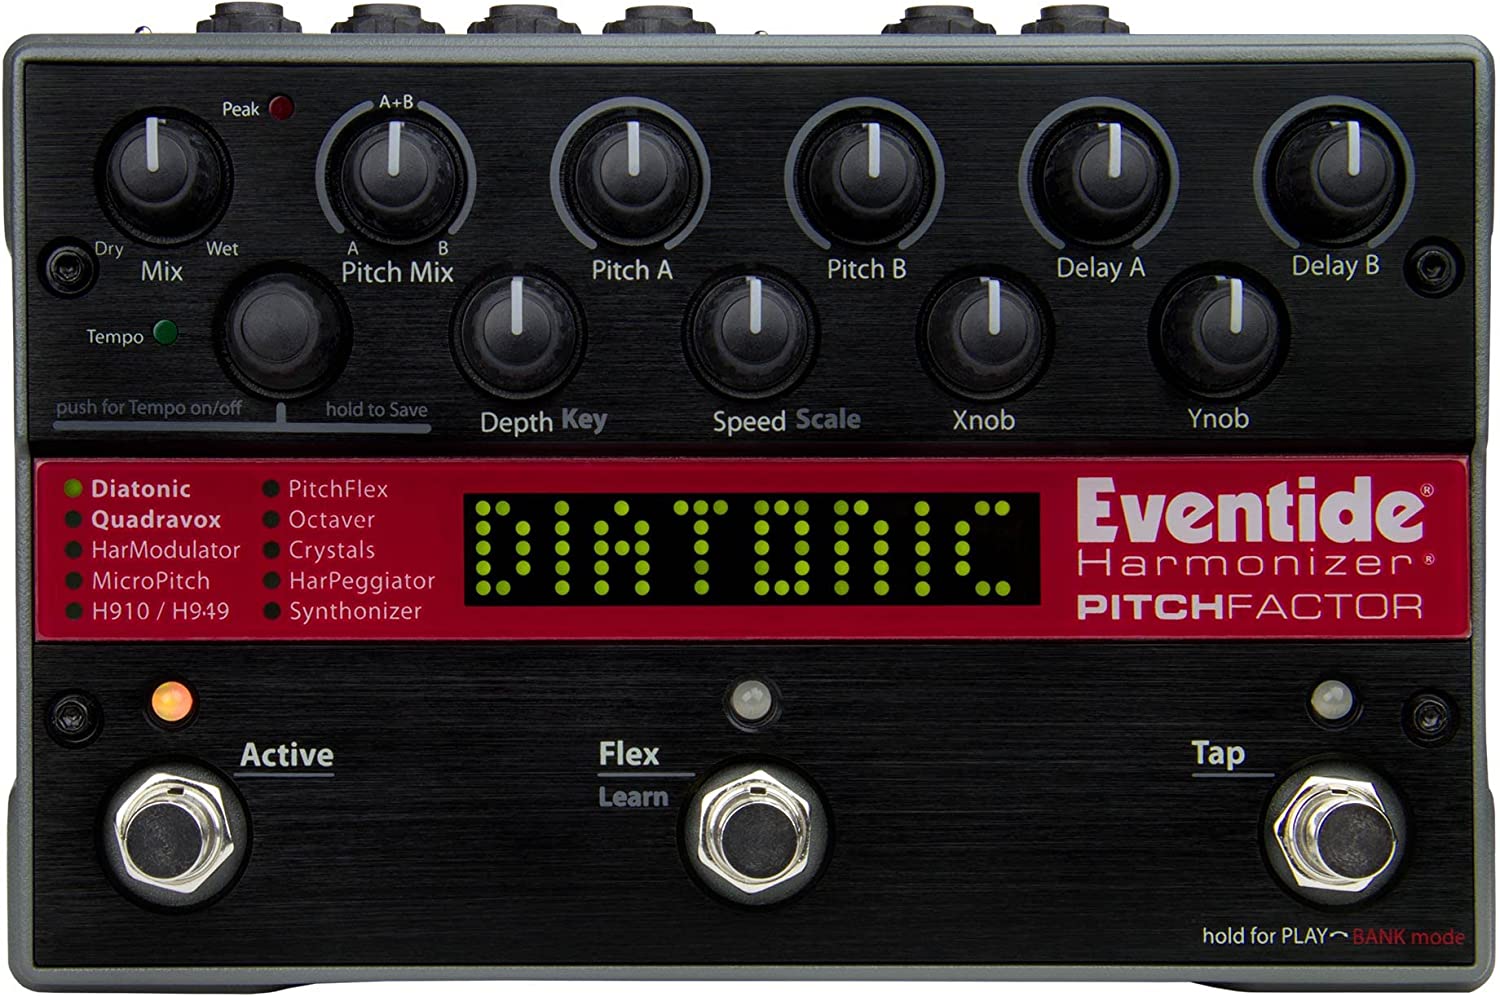 Eventide PitchFactor Harmonizer Guitar Effects Pedal on a white background